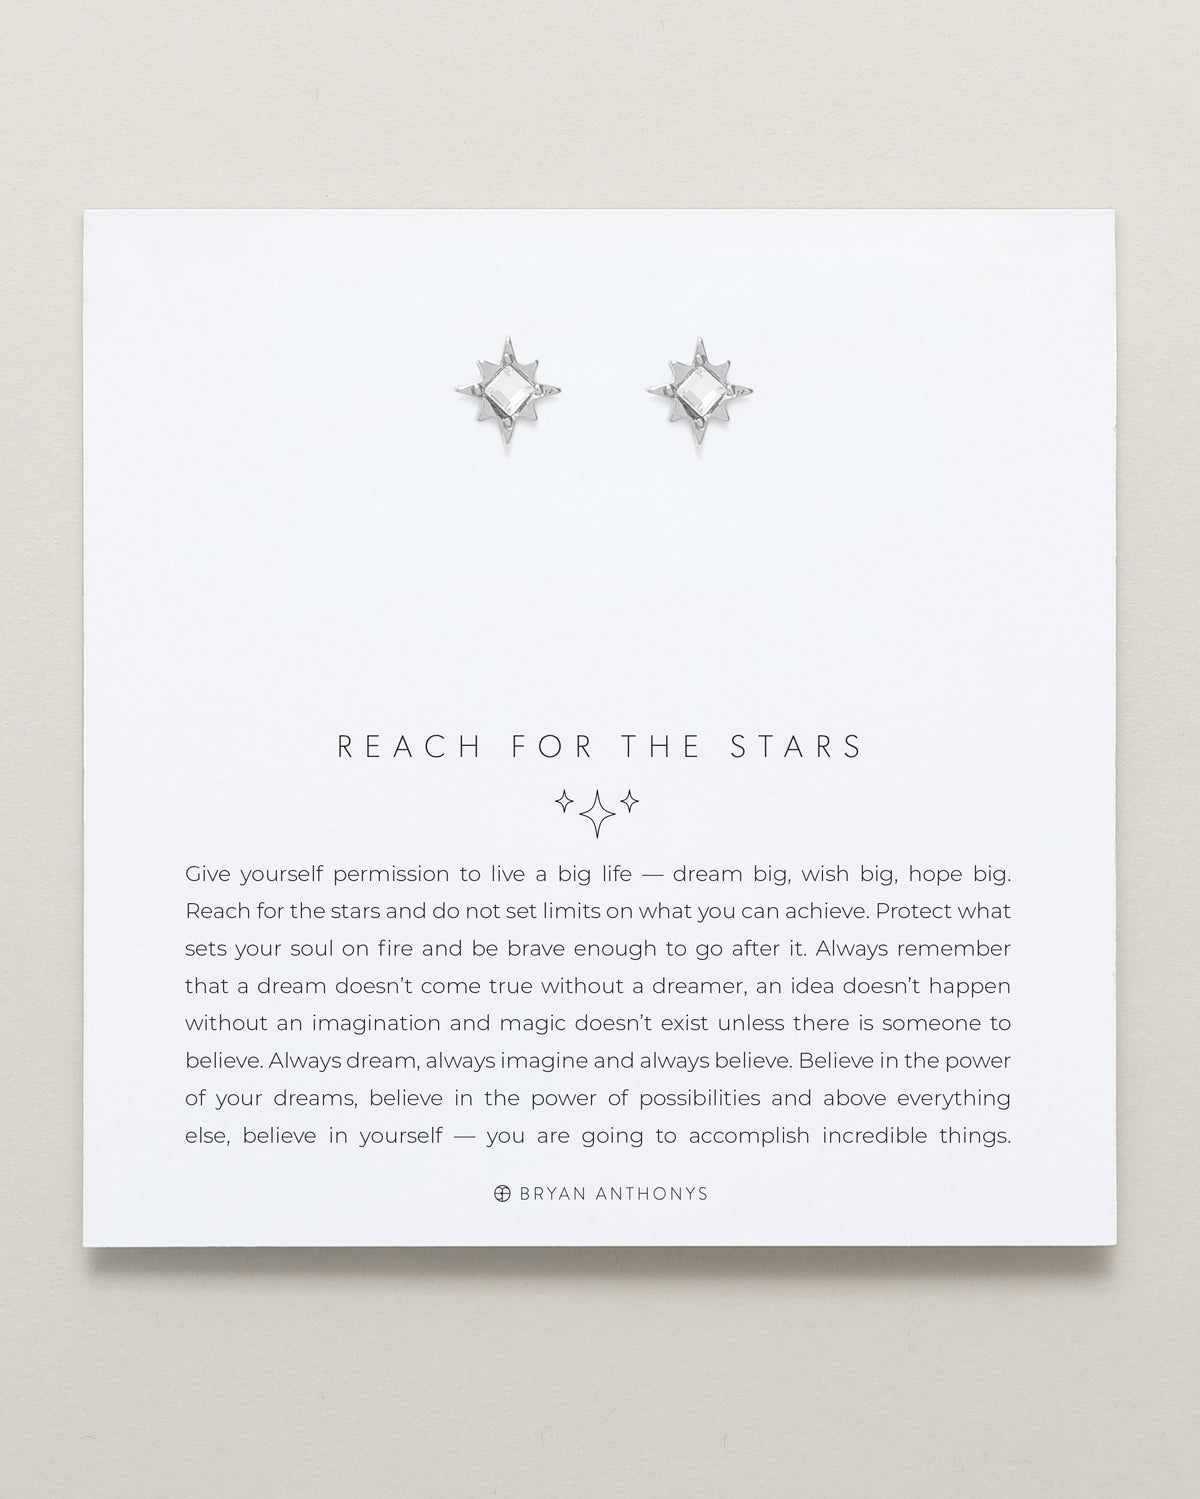 bryan anthonys dainty reach for the stars earrings silverBryan Anthonys Reach For The Stars Silver Earrings With Crystals On Card